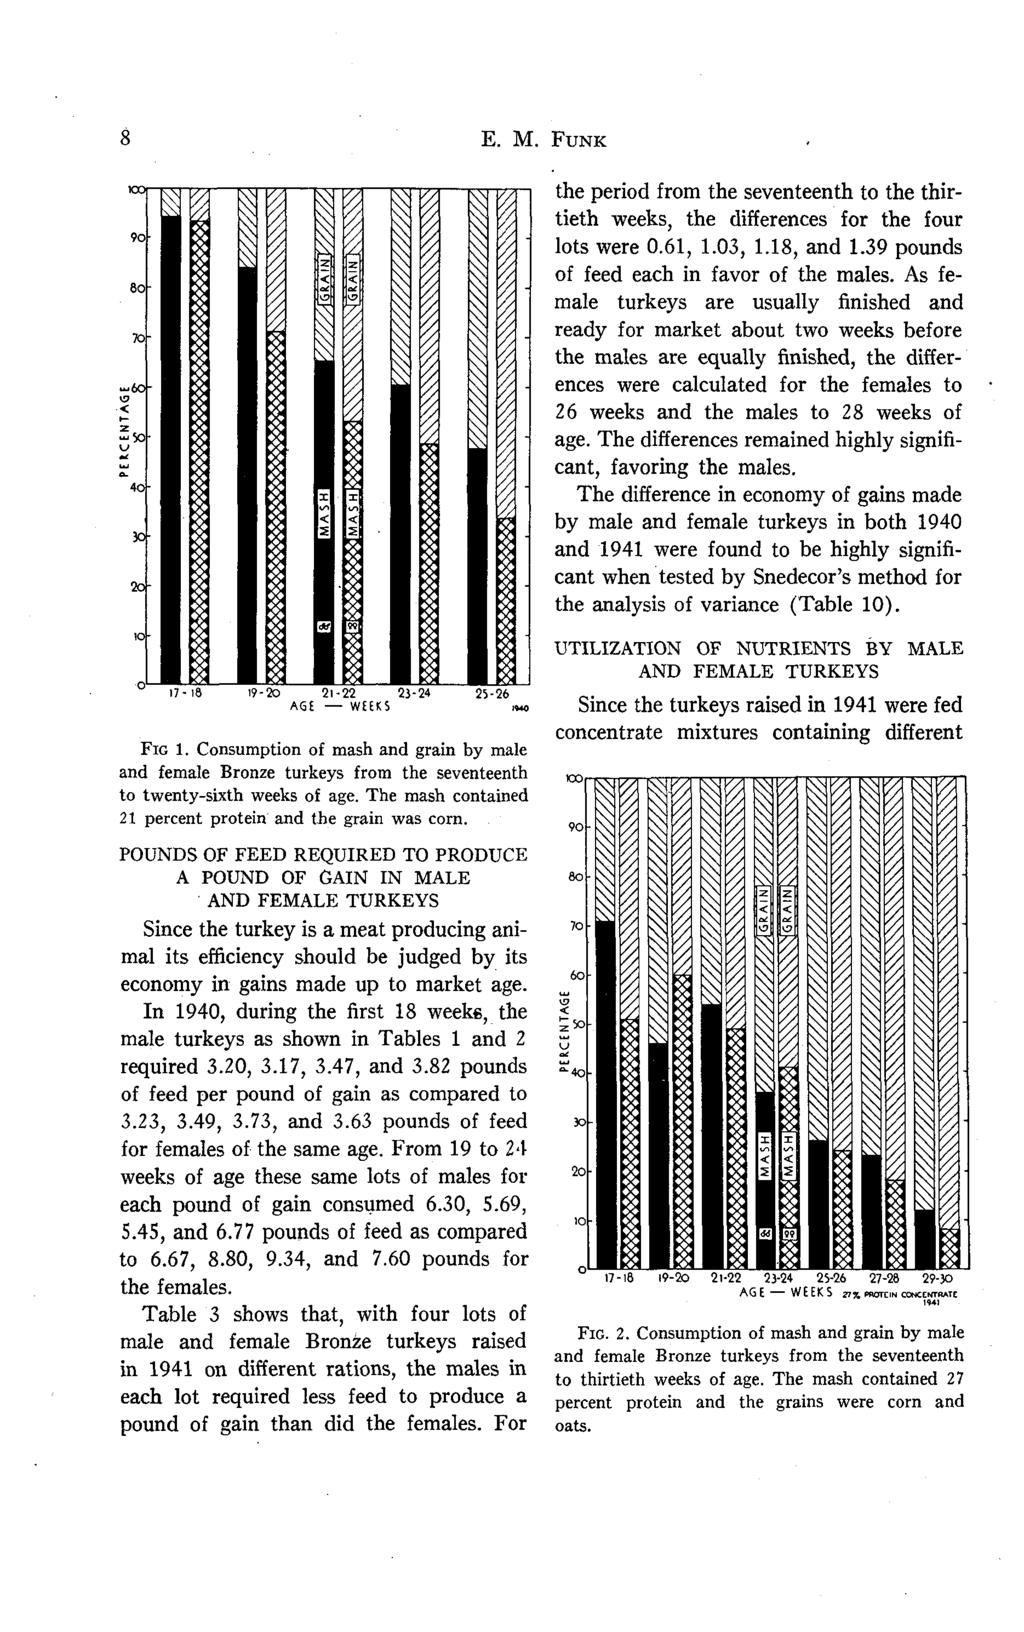 E. M. FUNK AGE WEEKS FIG 1. Consumption of mash and grain by male and female Bronze turkeys from the seventeenth to twenty-sixth of age. The mash contained 21 percent protein and the grain was corn.